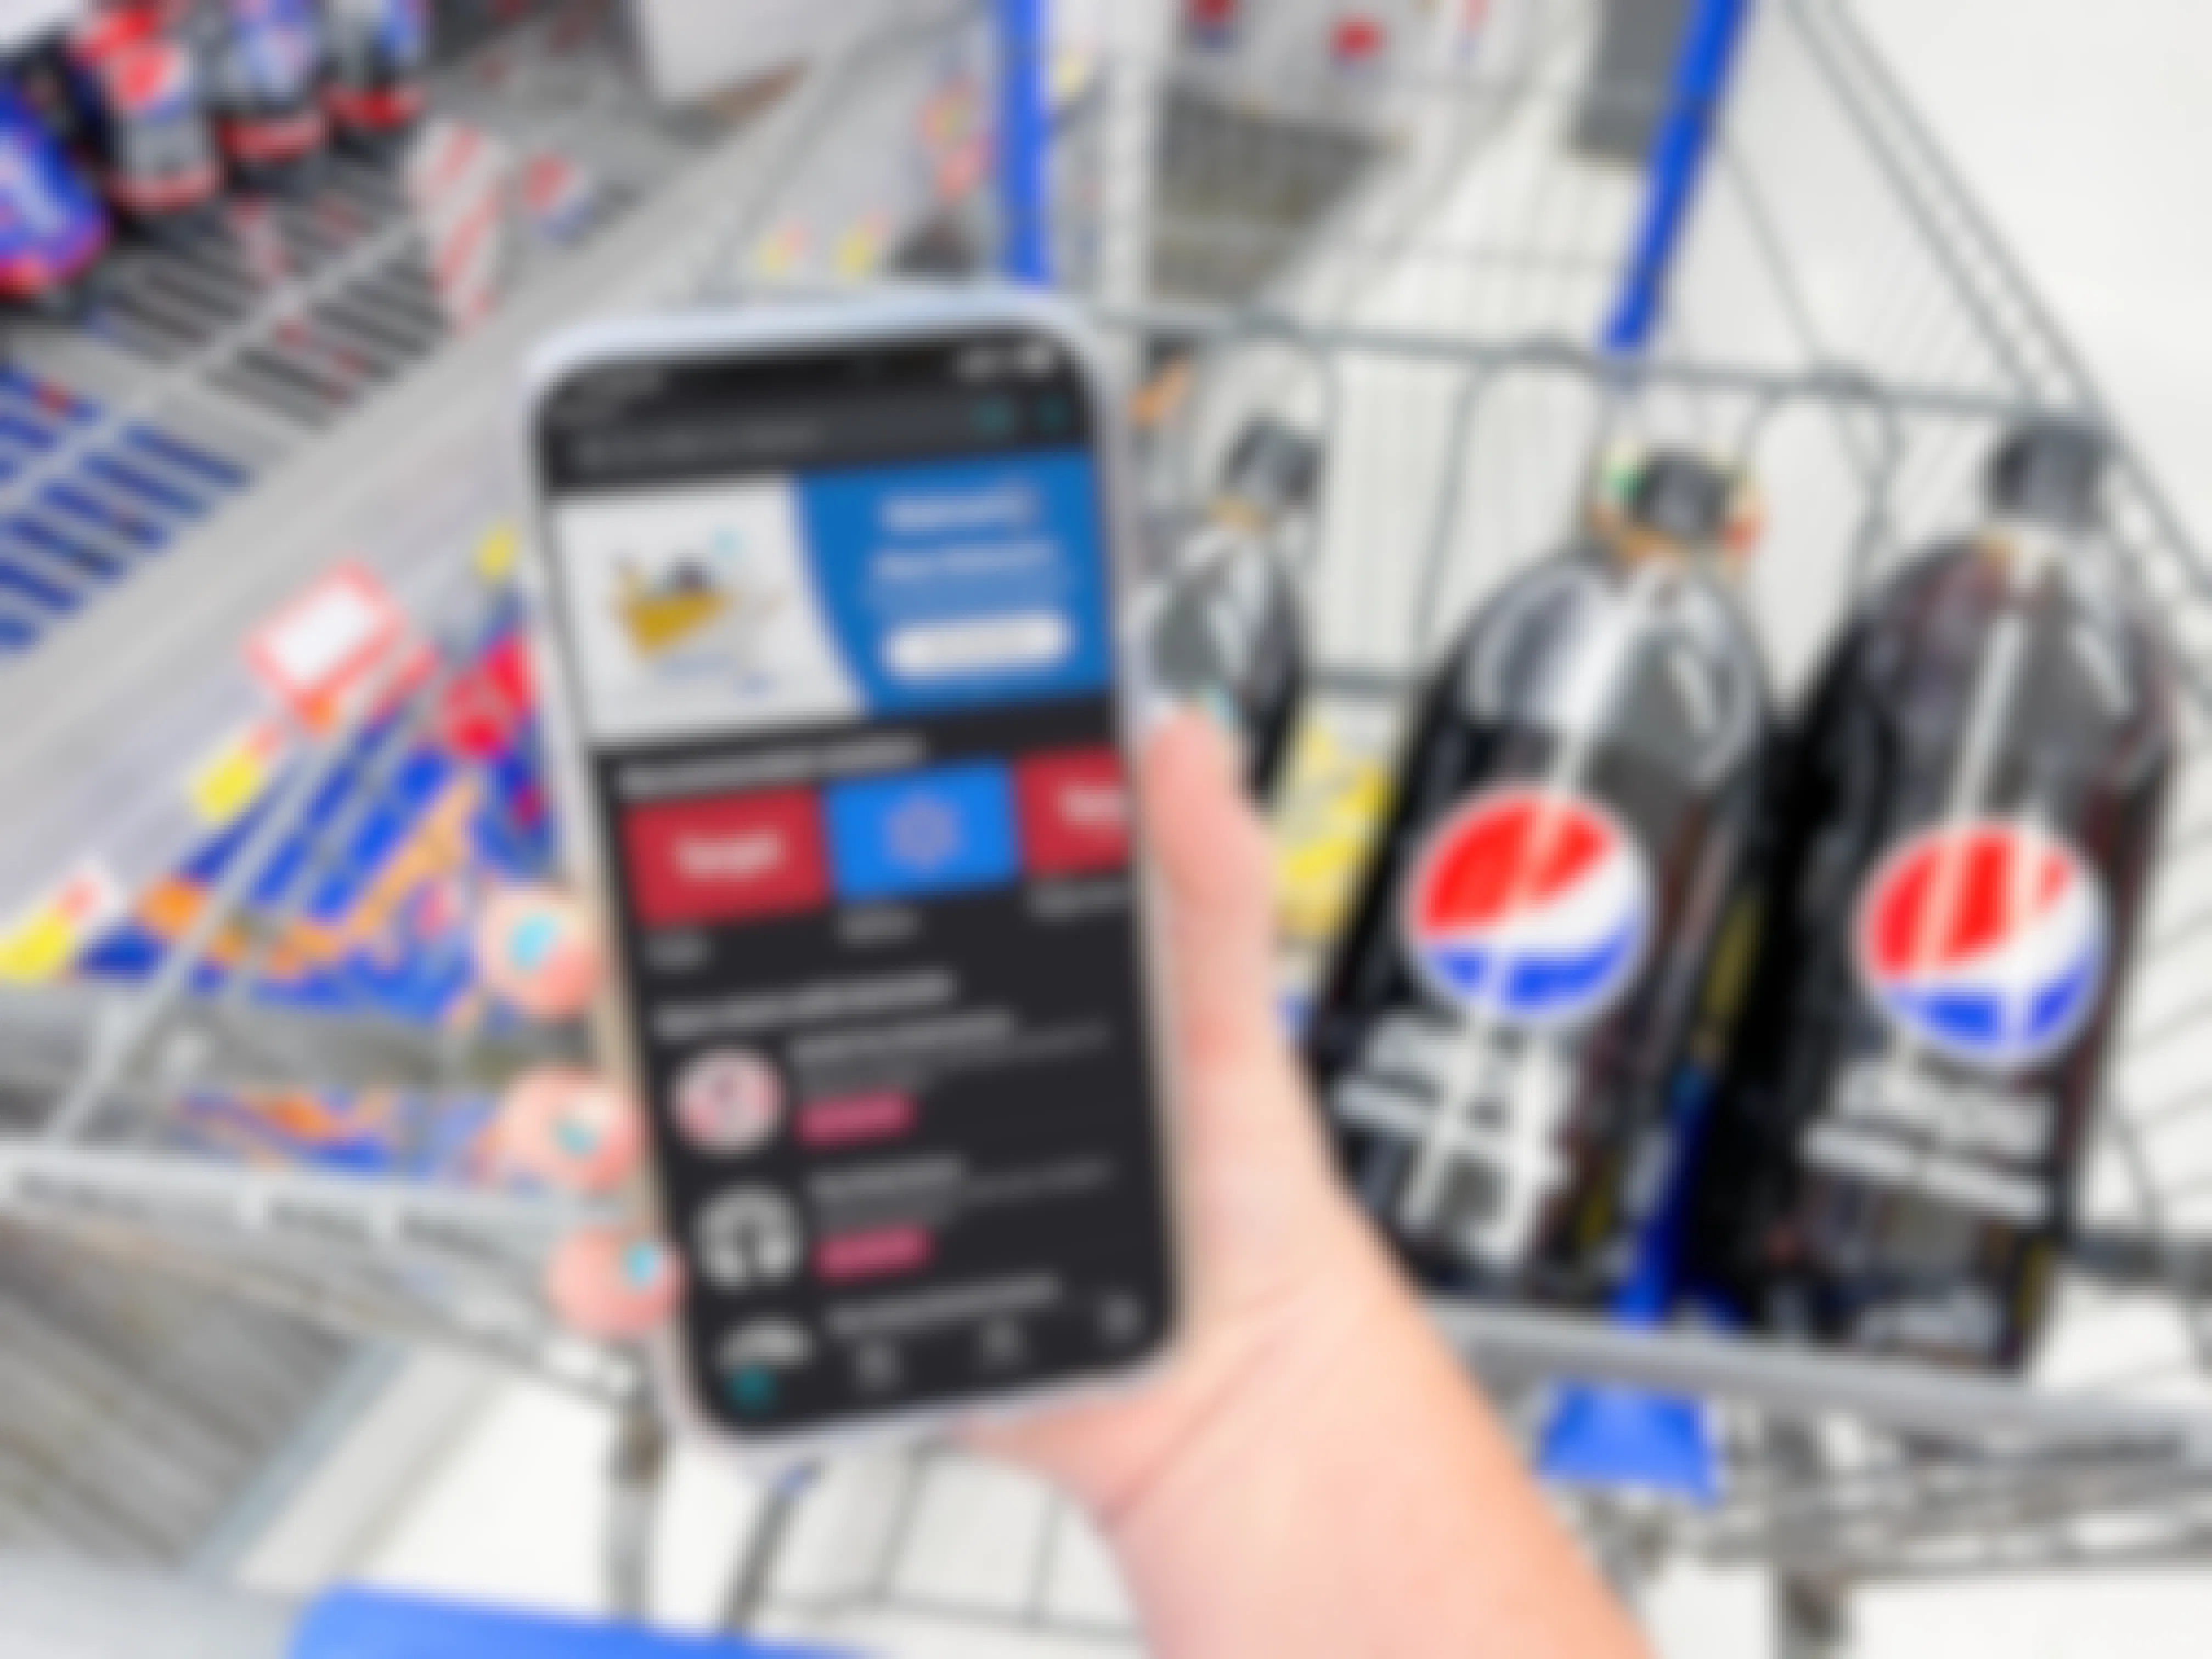 hand holding cellphone with iboota app in front of pepsi bottles in cart